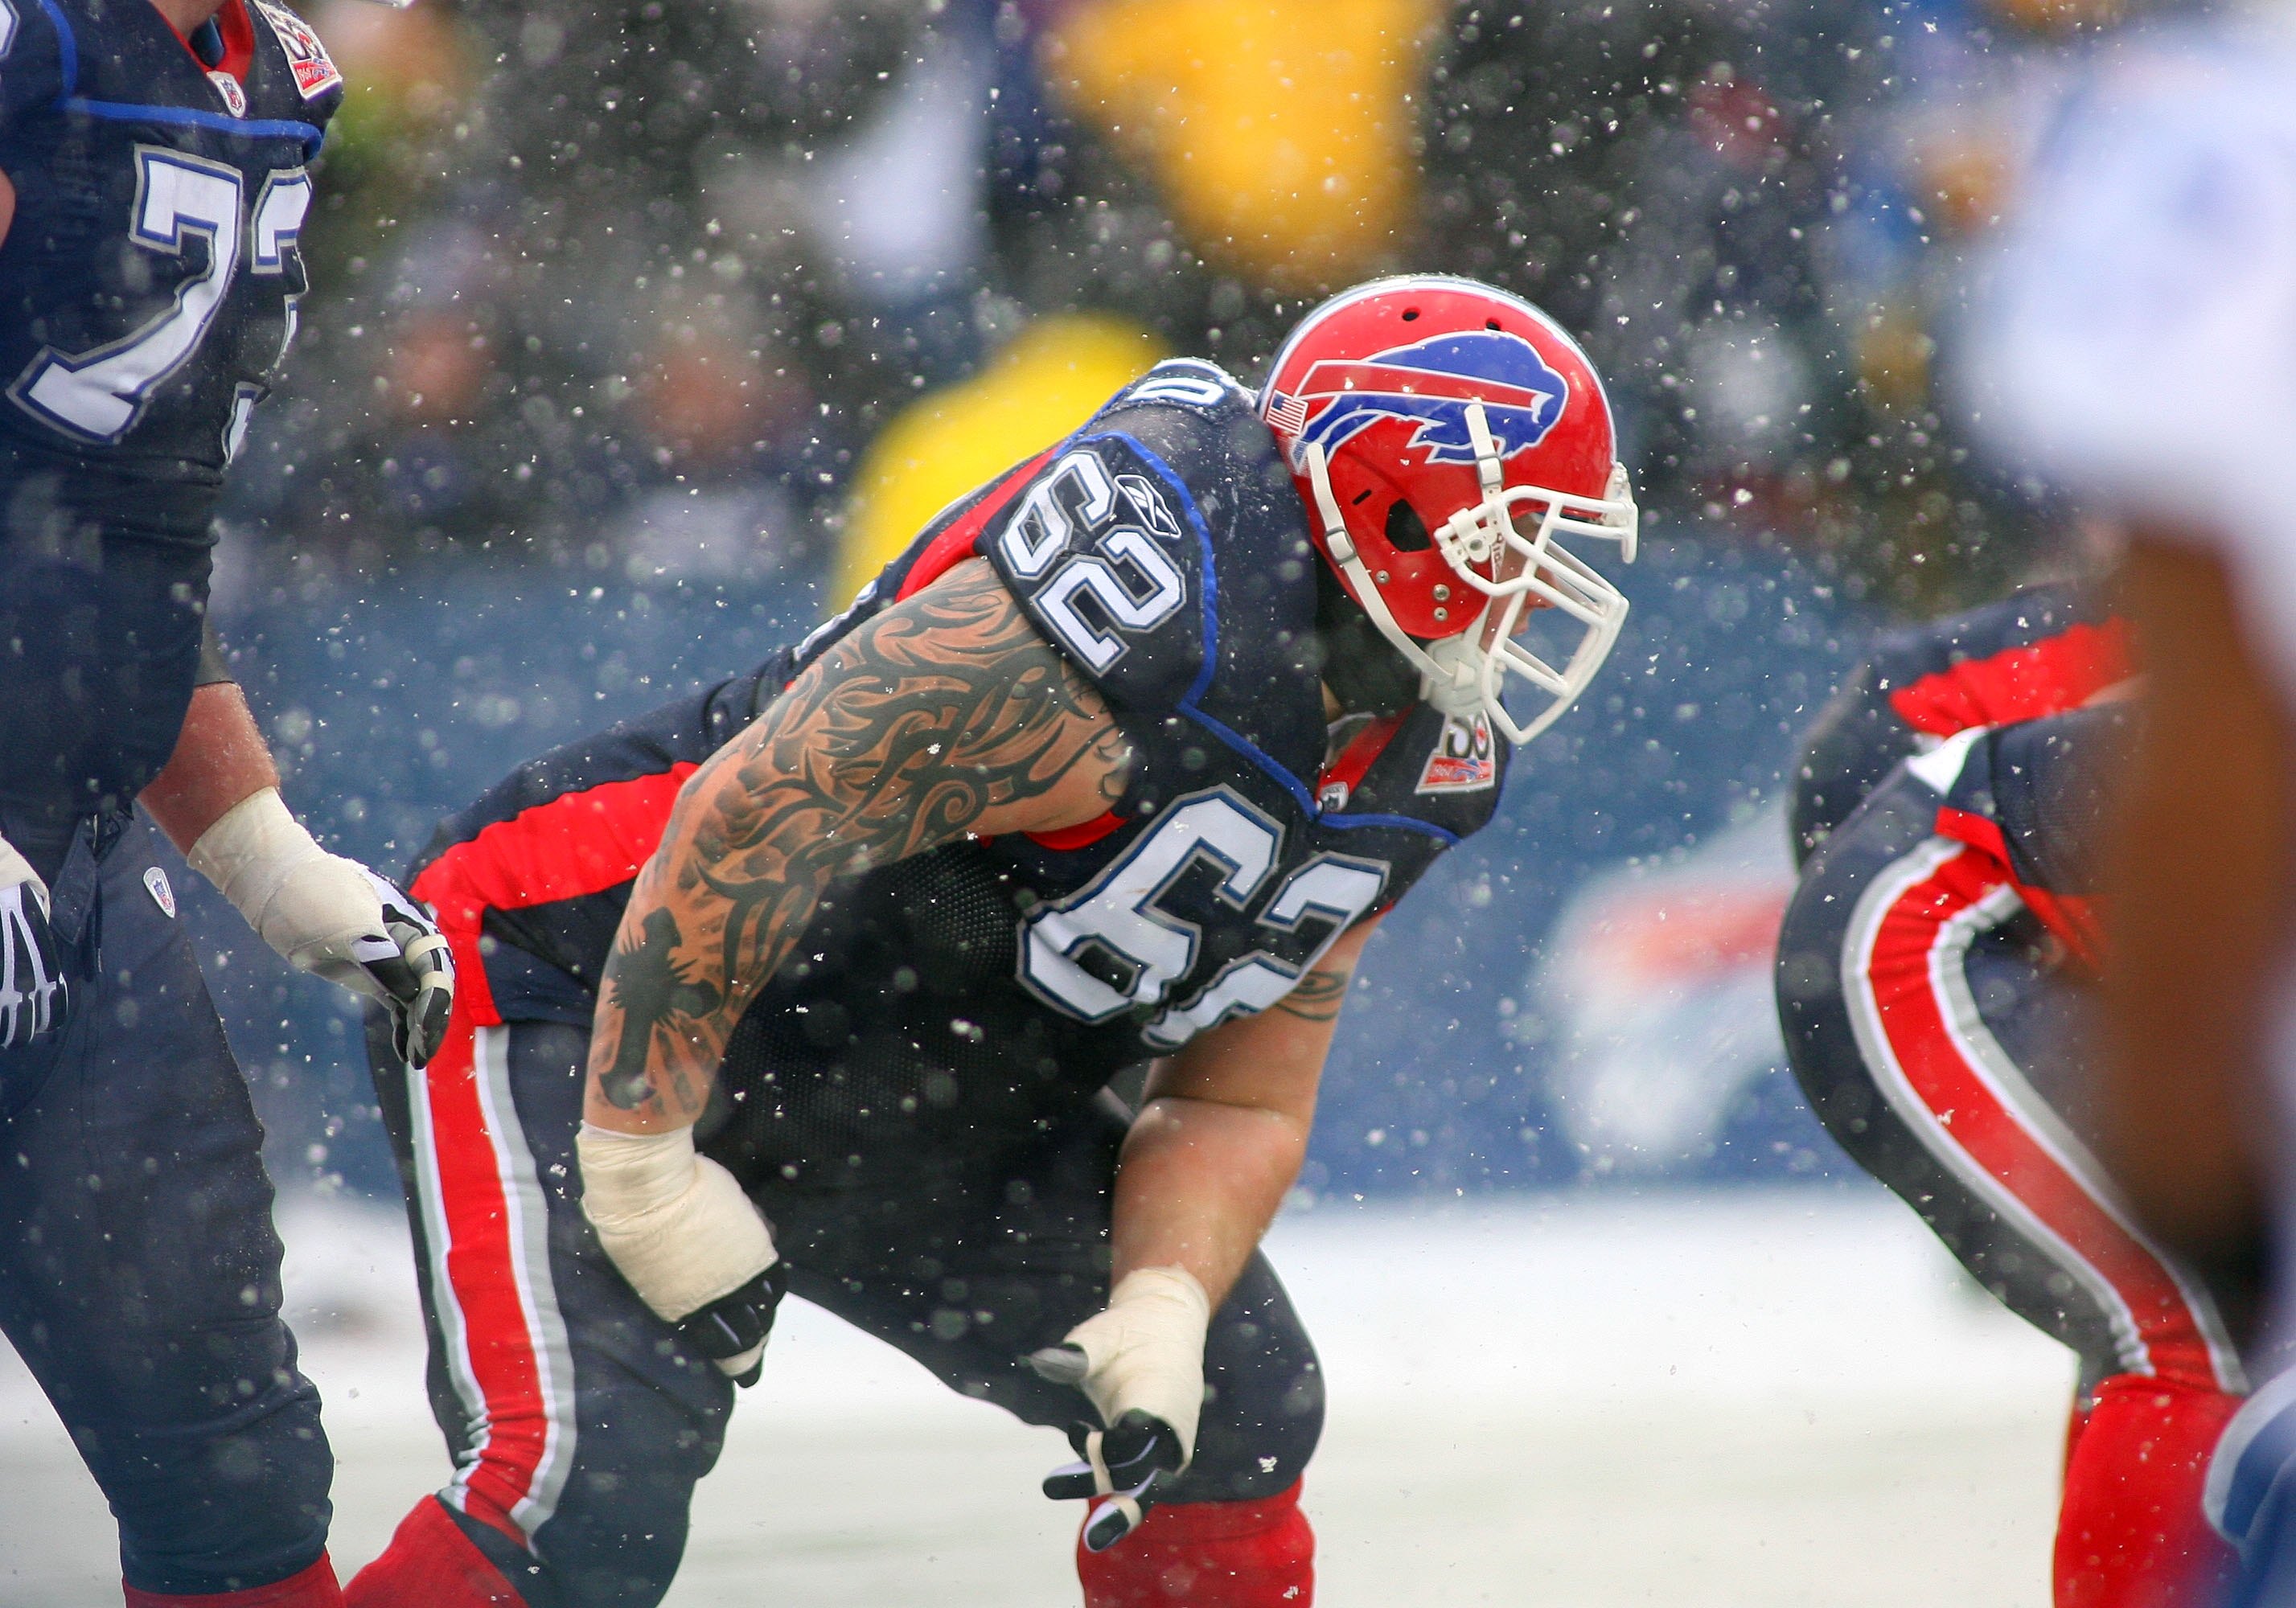 ORCHARD PARK, NY - JANUARY 3:  Richie Incognito #62 of the Buffalo Bills lines up in position against the Indianapolis Colts during their NFL game at Ralph Wilson Stadium on January 3, 2010 in Orchard Park, New York. The Bills defeated the Colts 30-7. (Ph